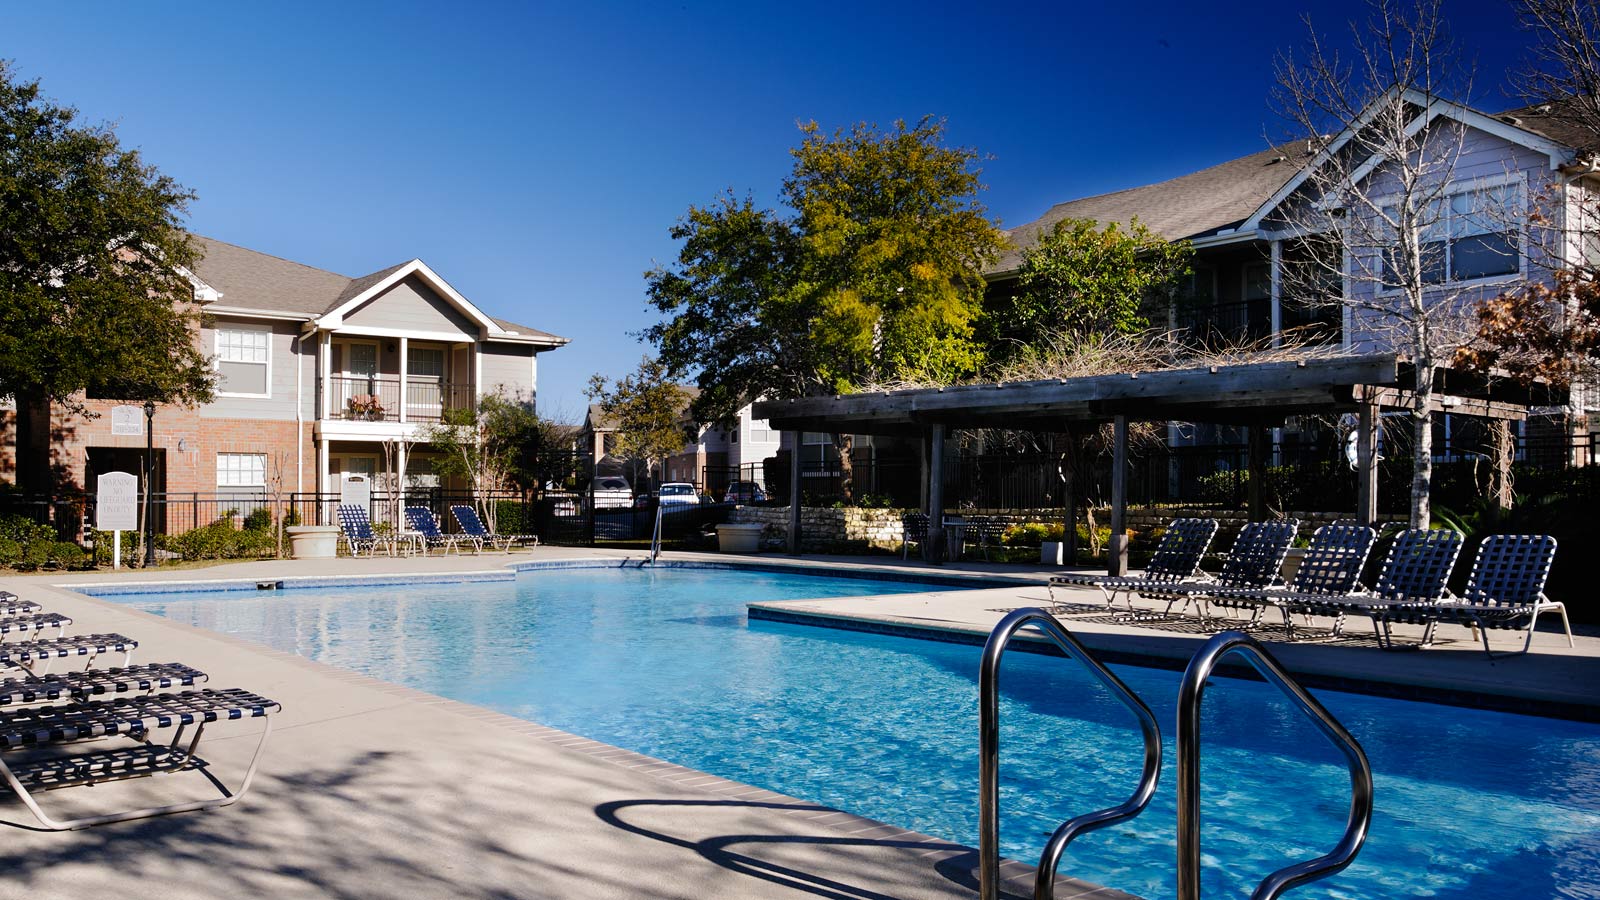 San Antonio multifamily is just one of many DST investments